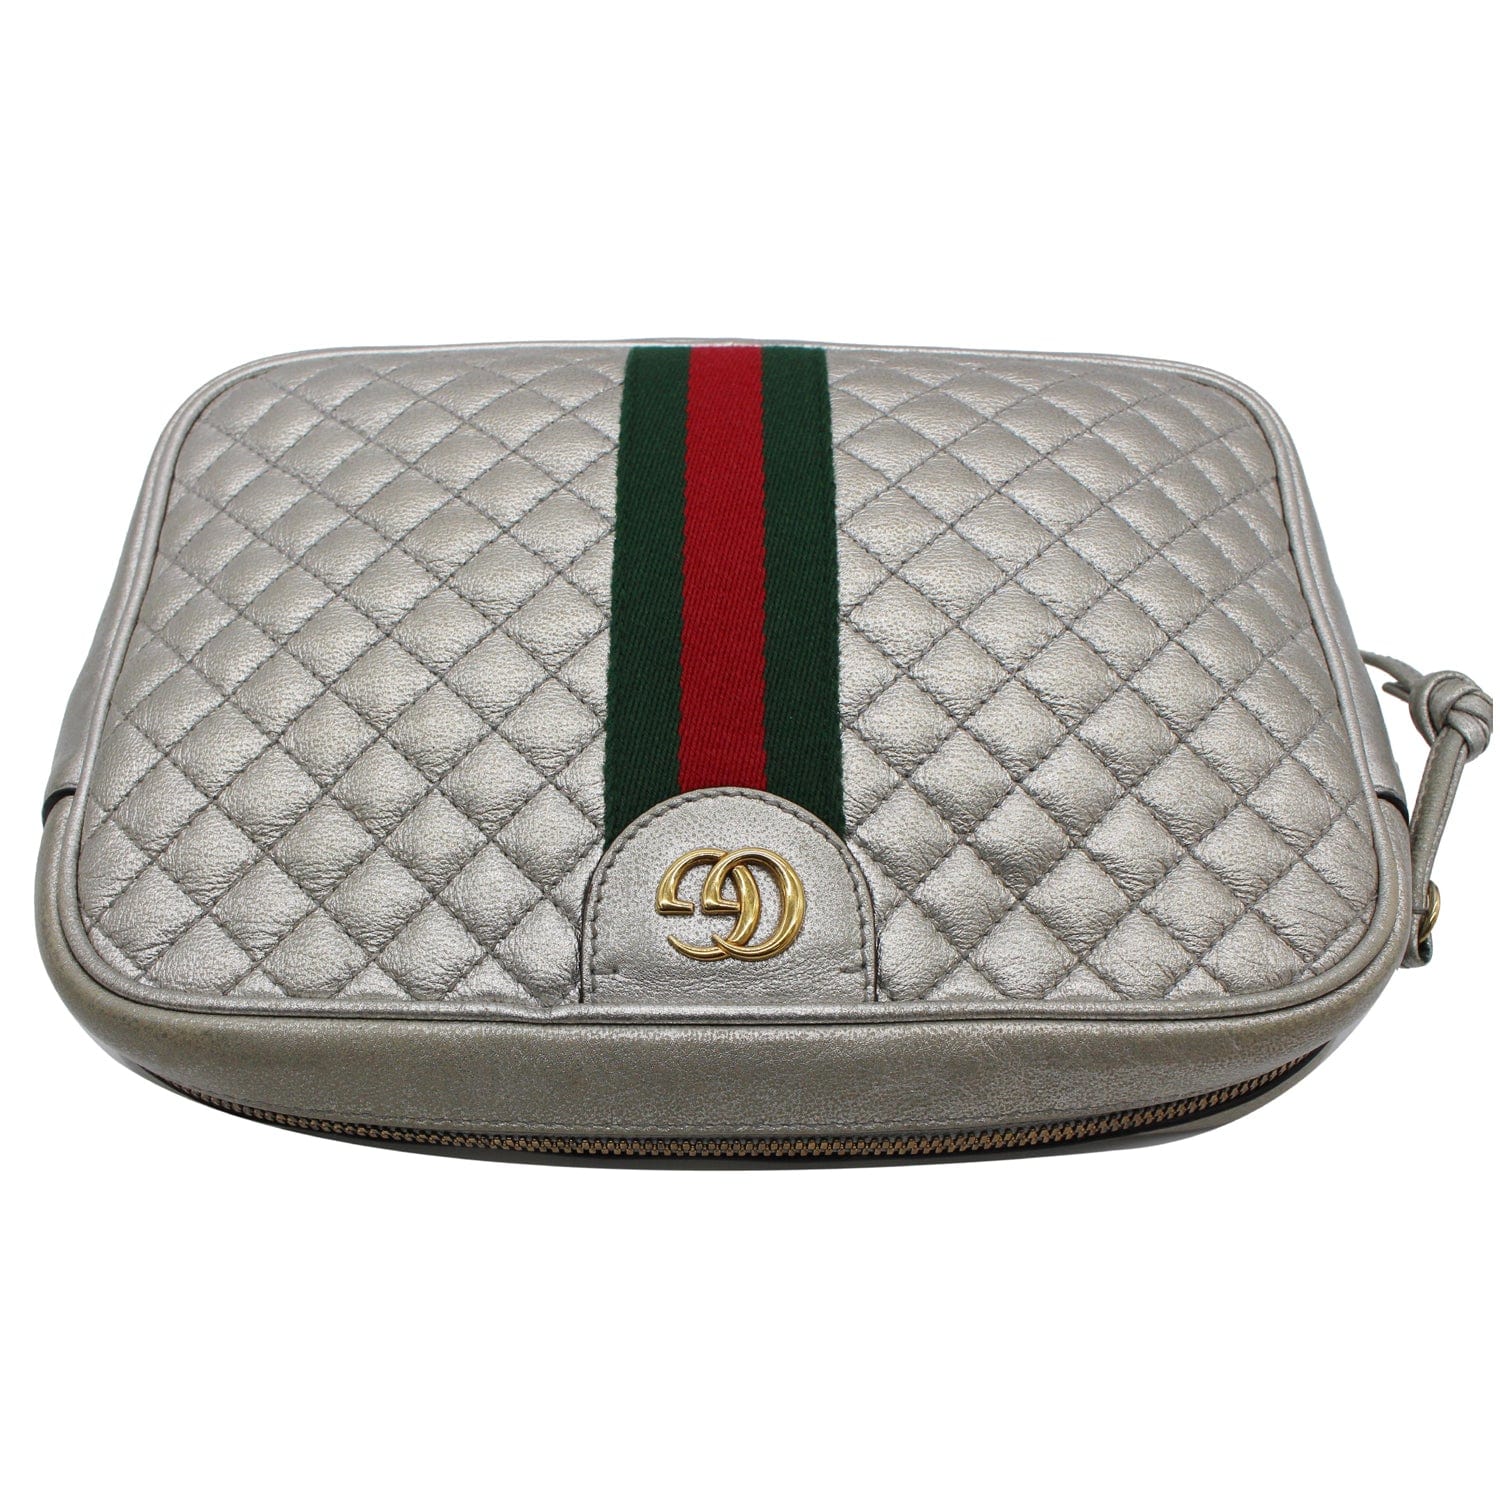 Redaktør Perversion Gemme GUCCI GG Small Quilted Leather Shoulder Bag Metallic Silver 541051 - 1